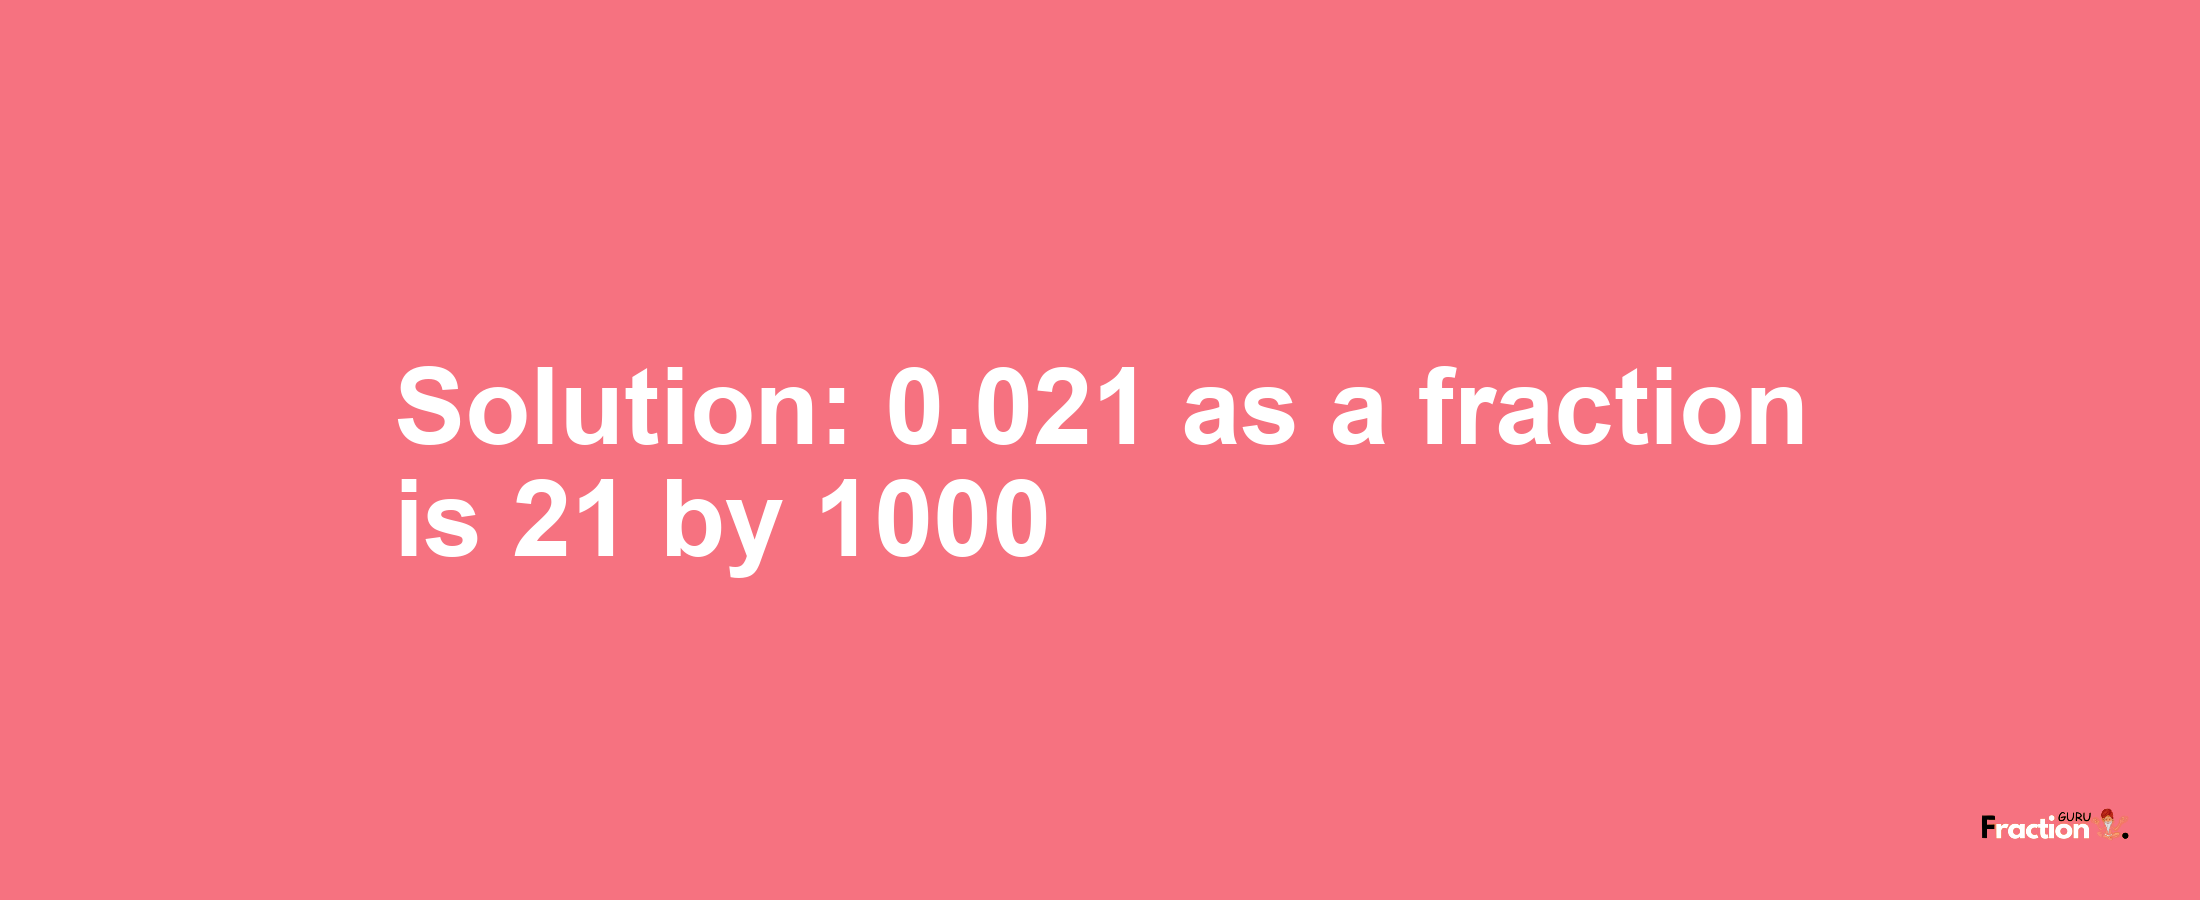 Solution:0.021 as a fraction is 21/1000